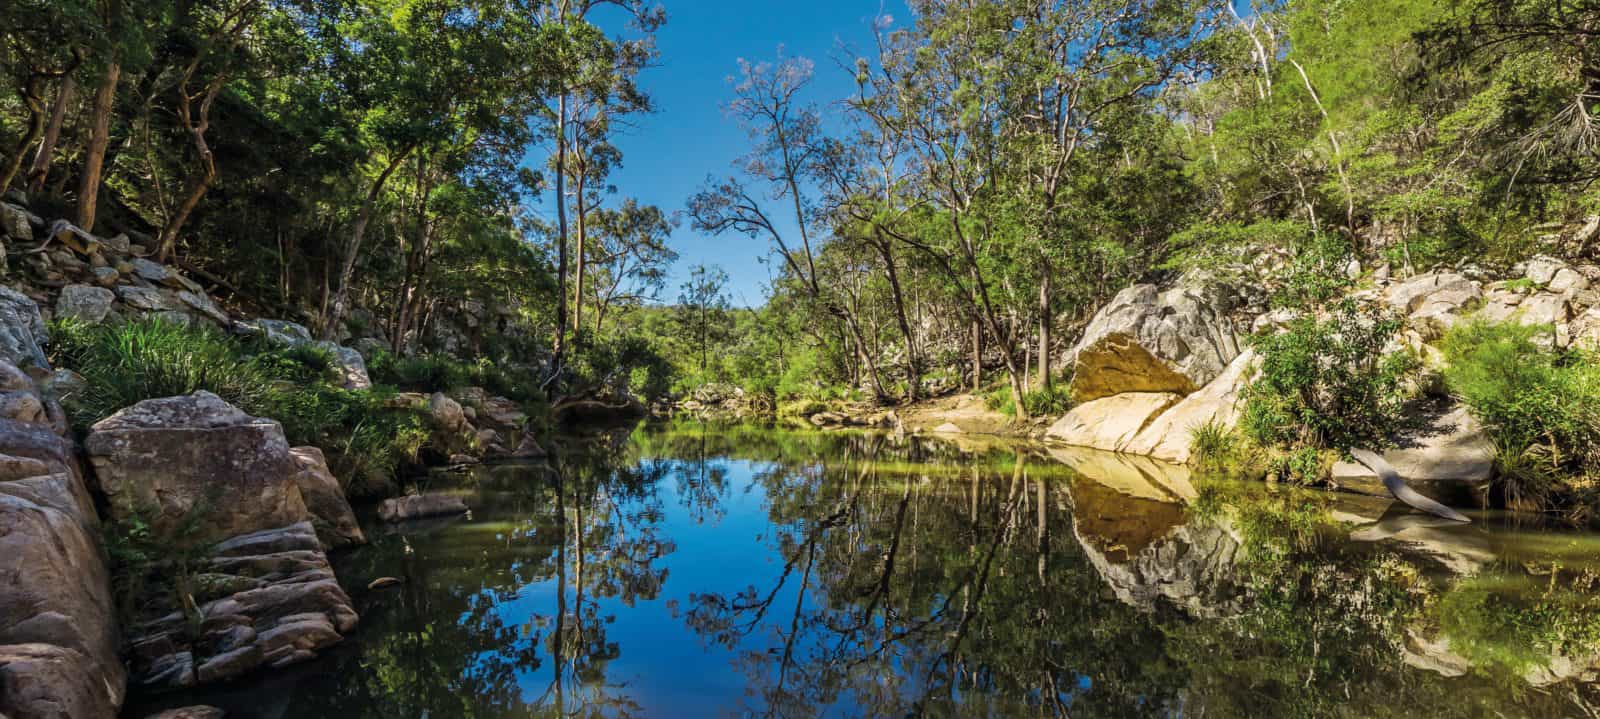 Picturesque waterway in Crows Nest National Park